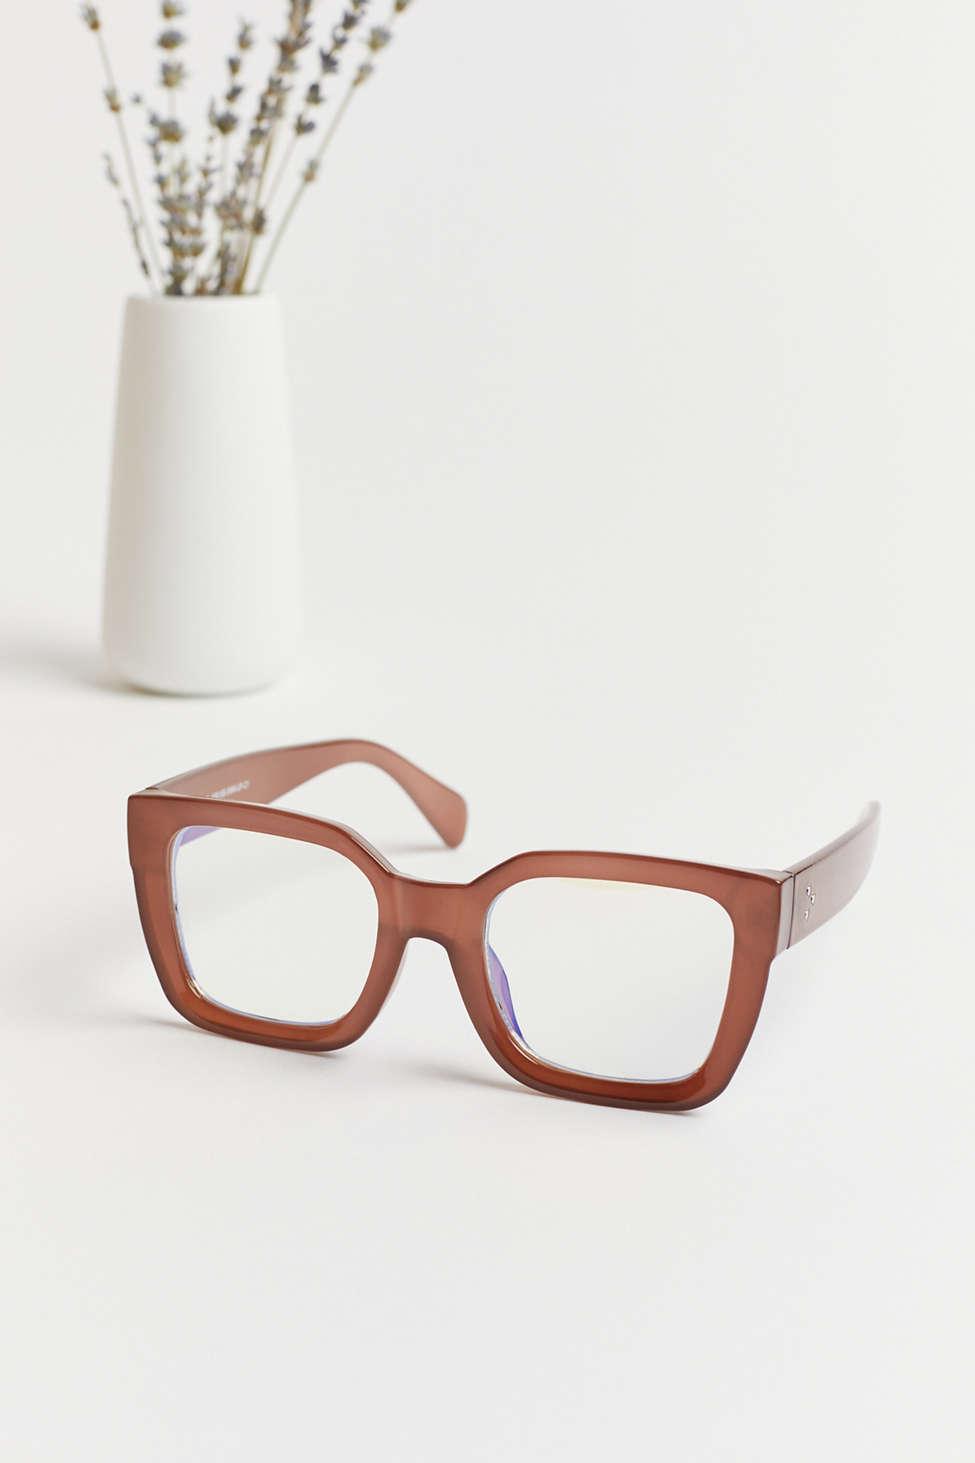 Urban Outfitters Marissa Square Blue Light Glasses in Brown - Lyst